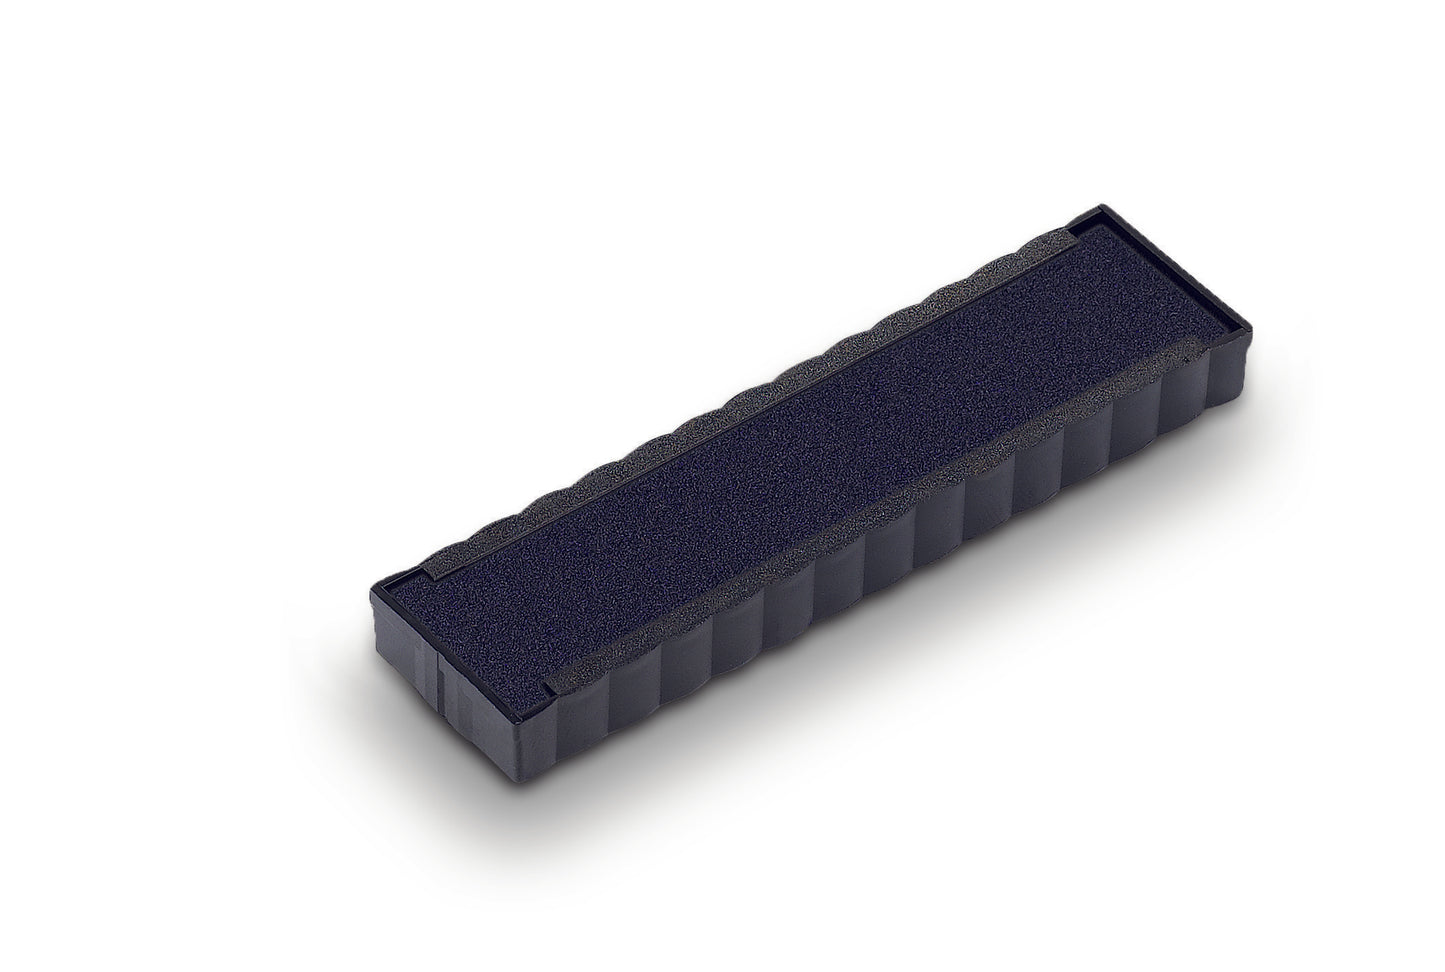 R4916 Replacement Ink Pad